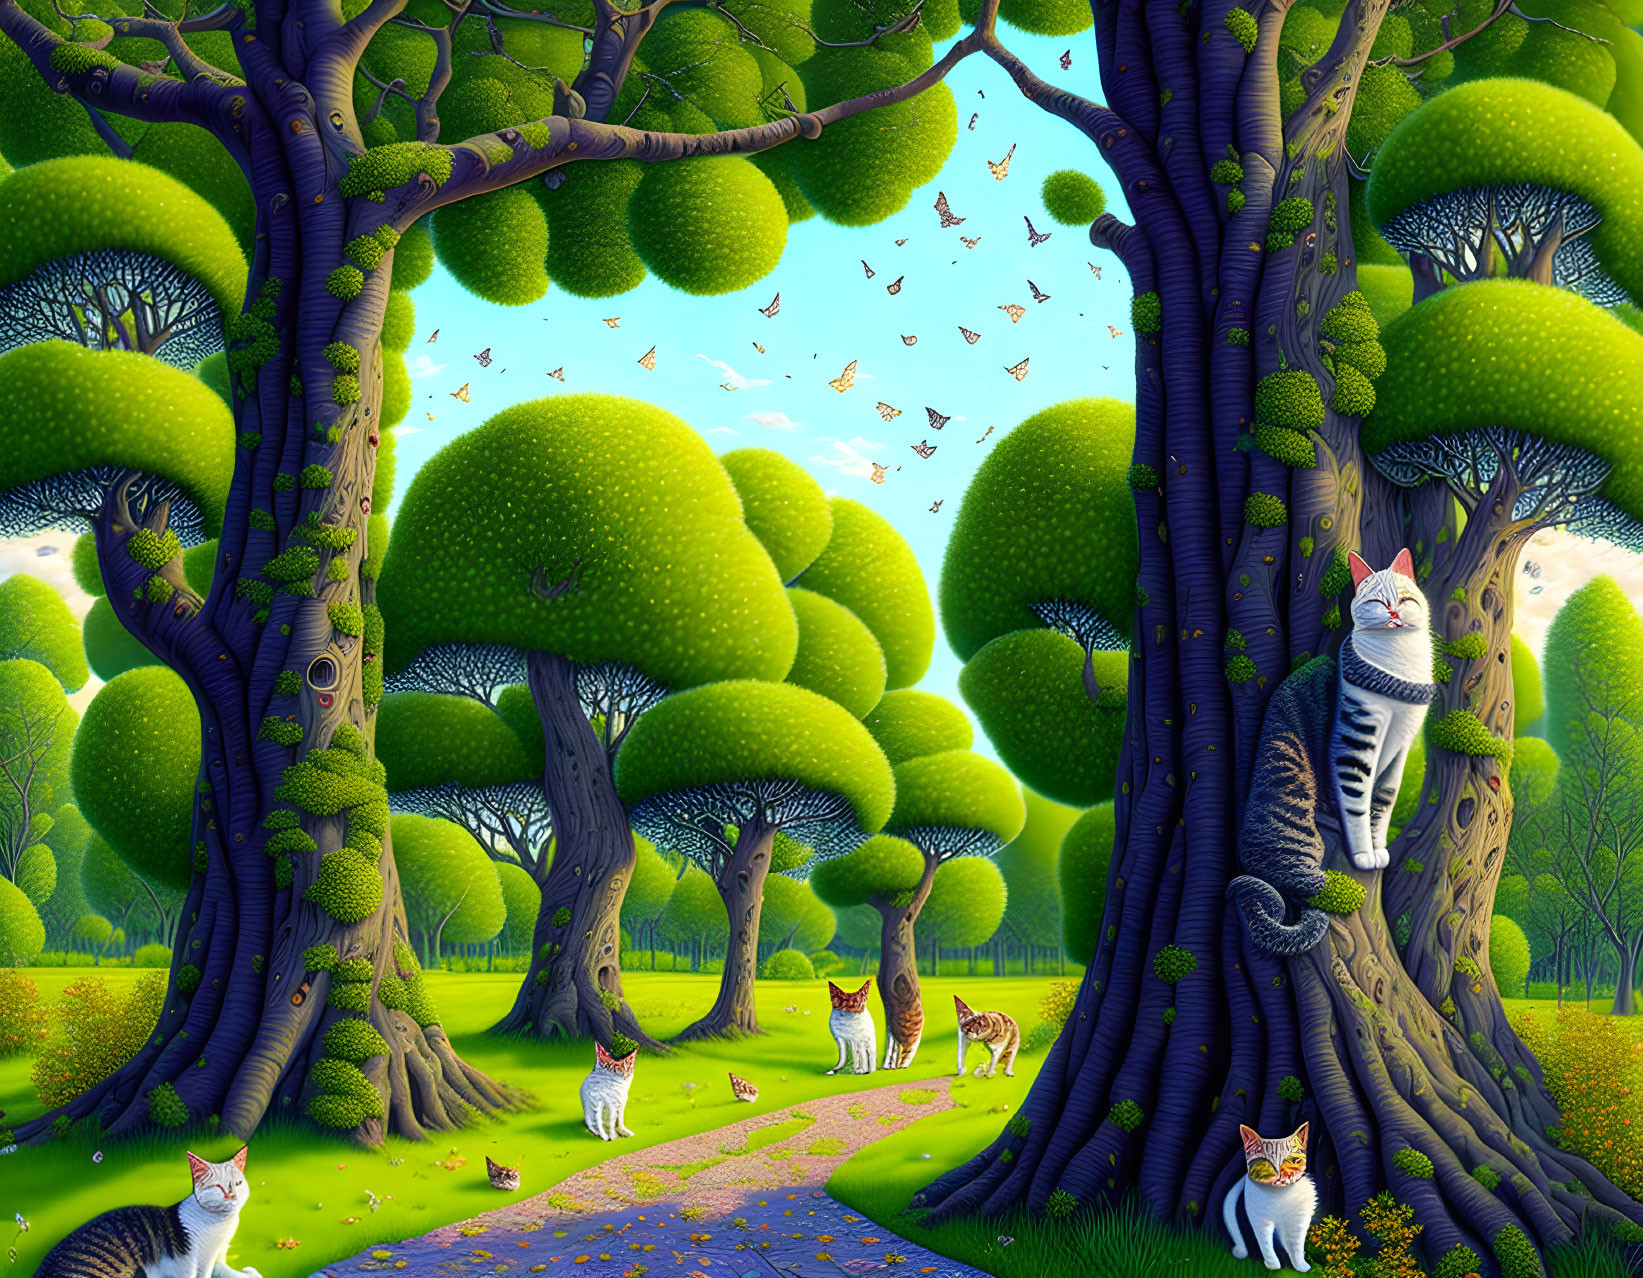 Colorful forest scene with broccoli-shaped trees, cats, and birds